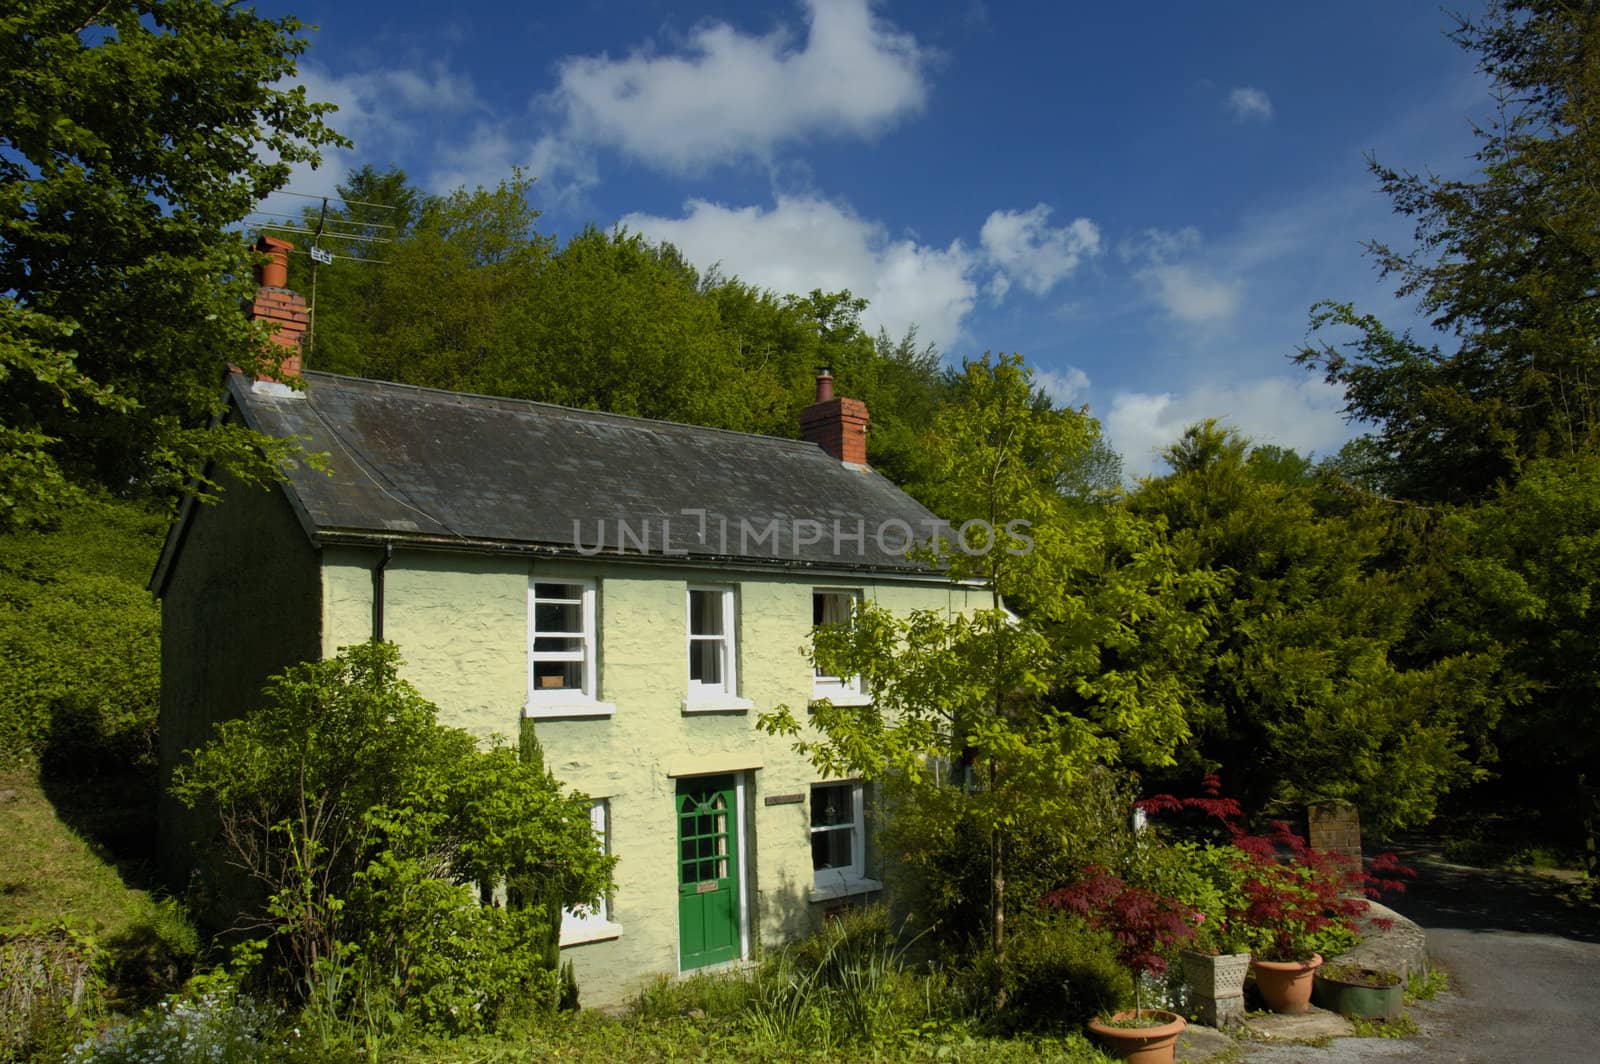 A country cottage, in rural Wales, under a summer sky.